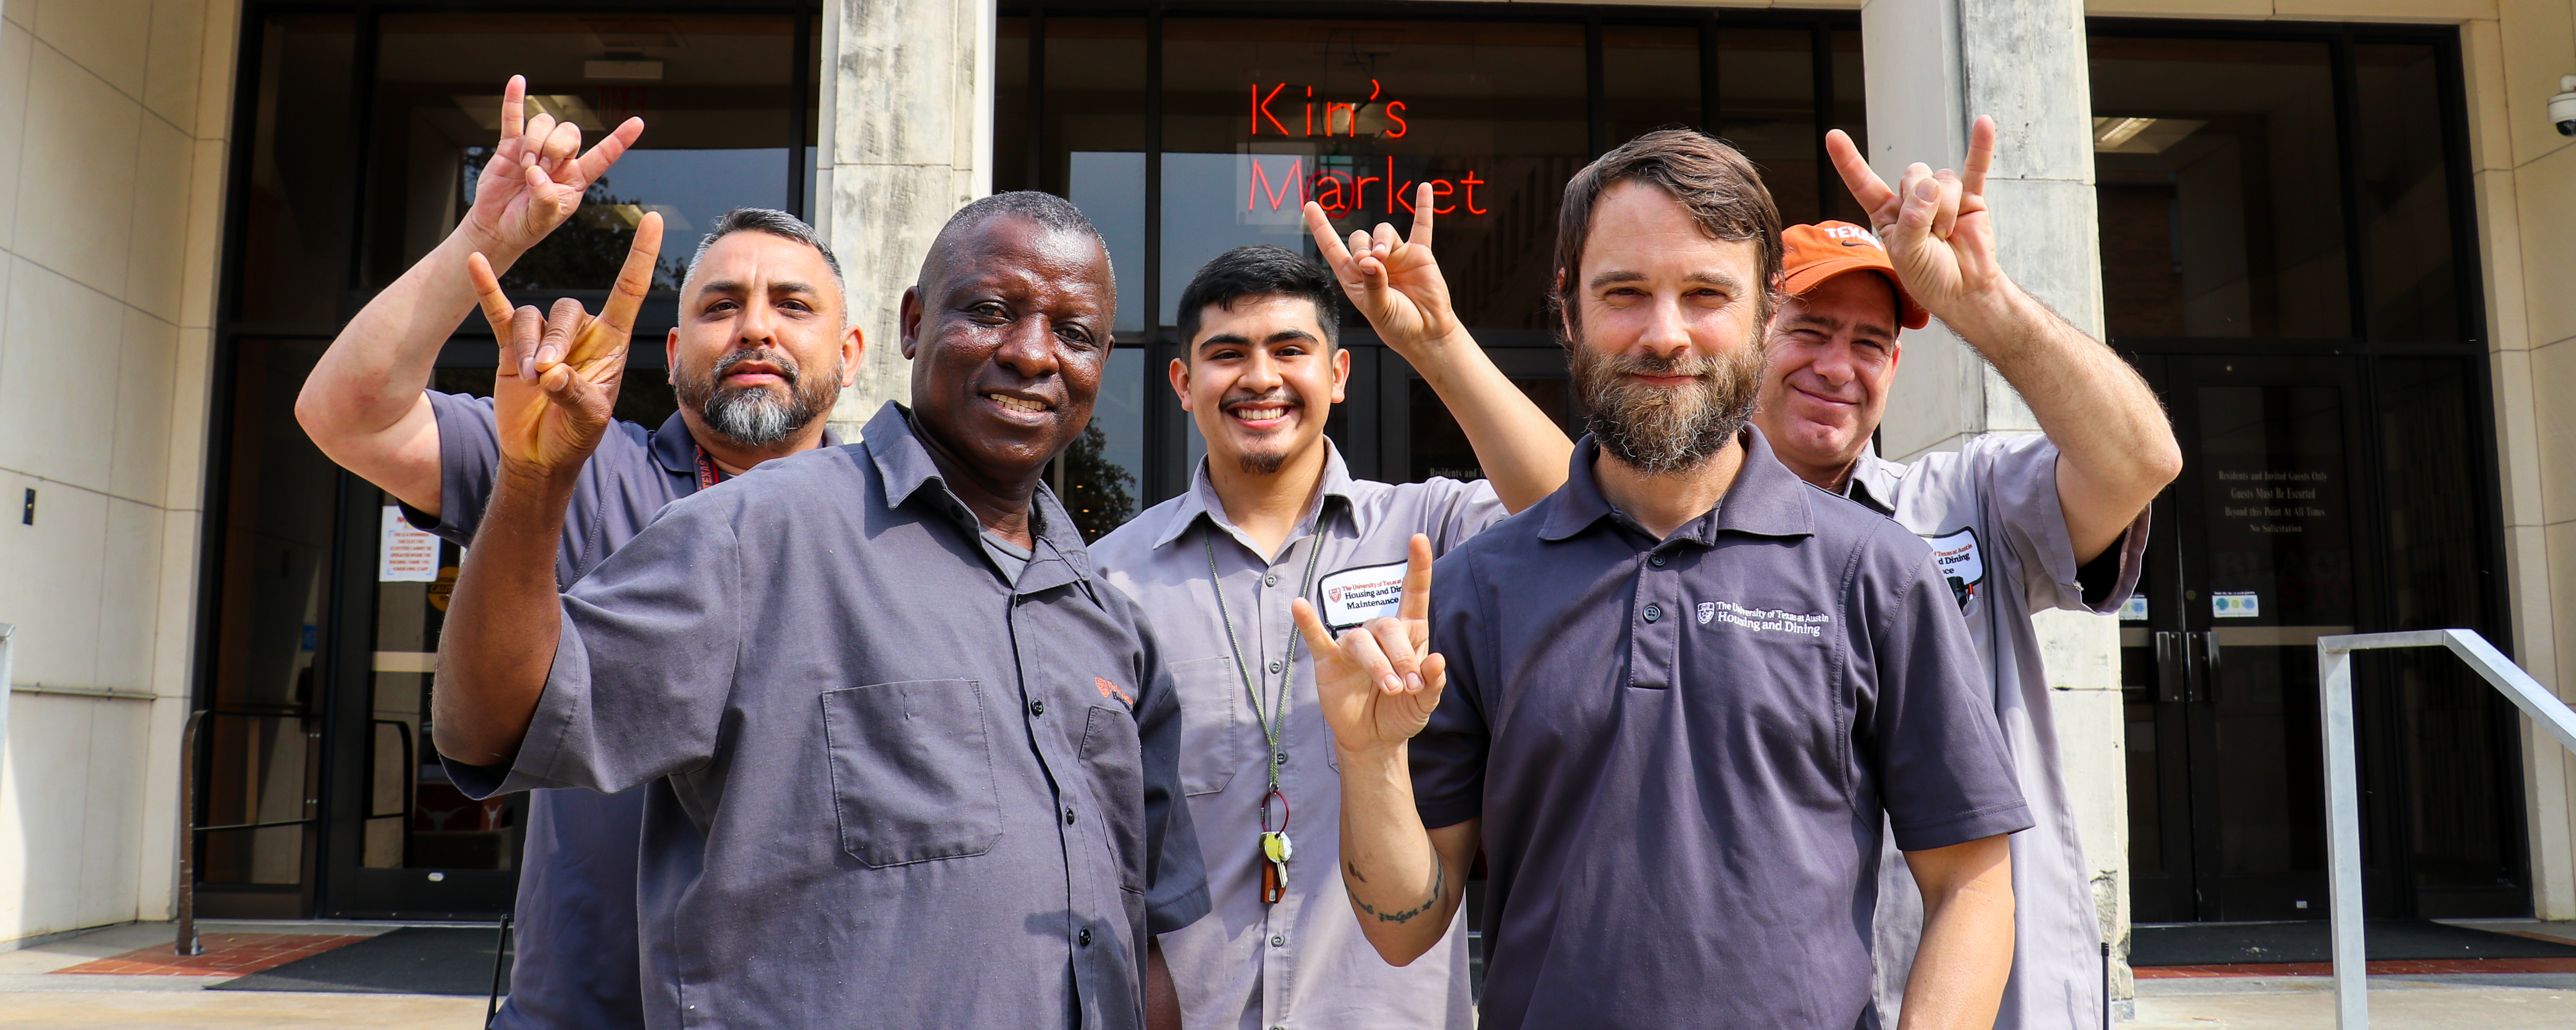 Five UHD employees outside smiling and holding up the UT Longhorns symbol with their hands.